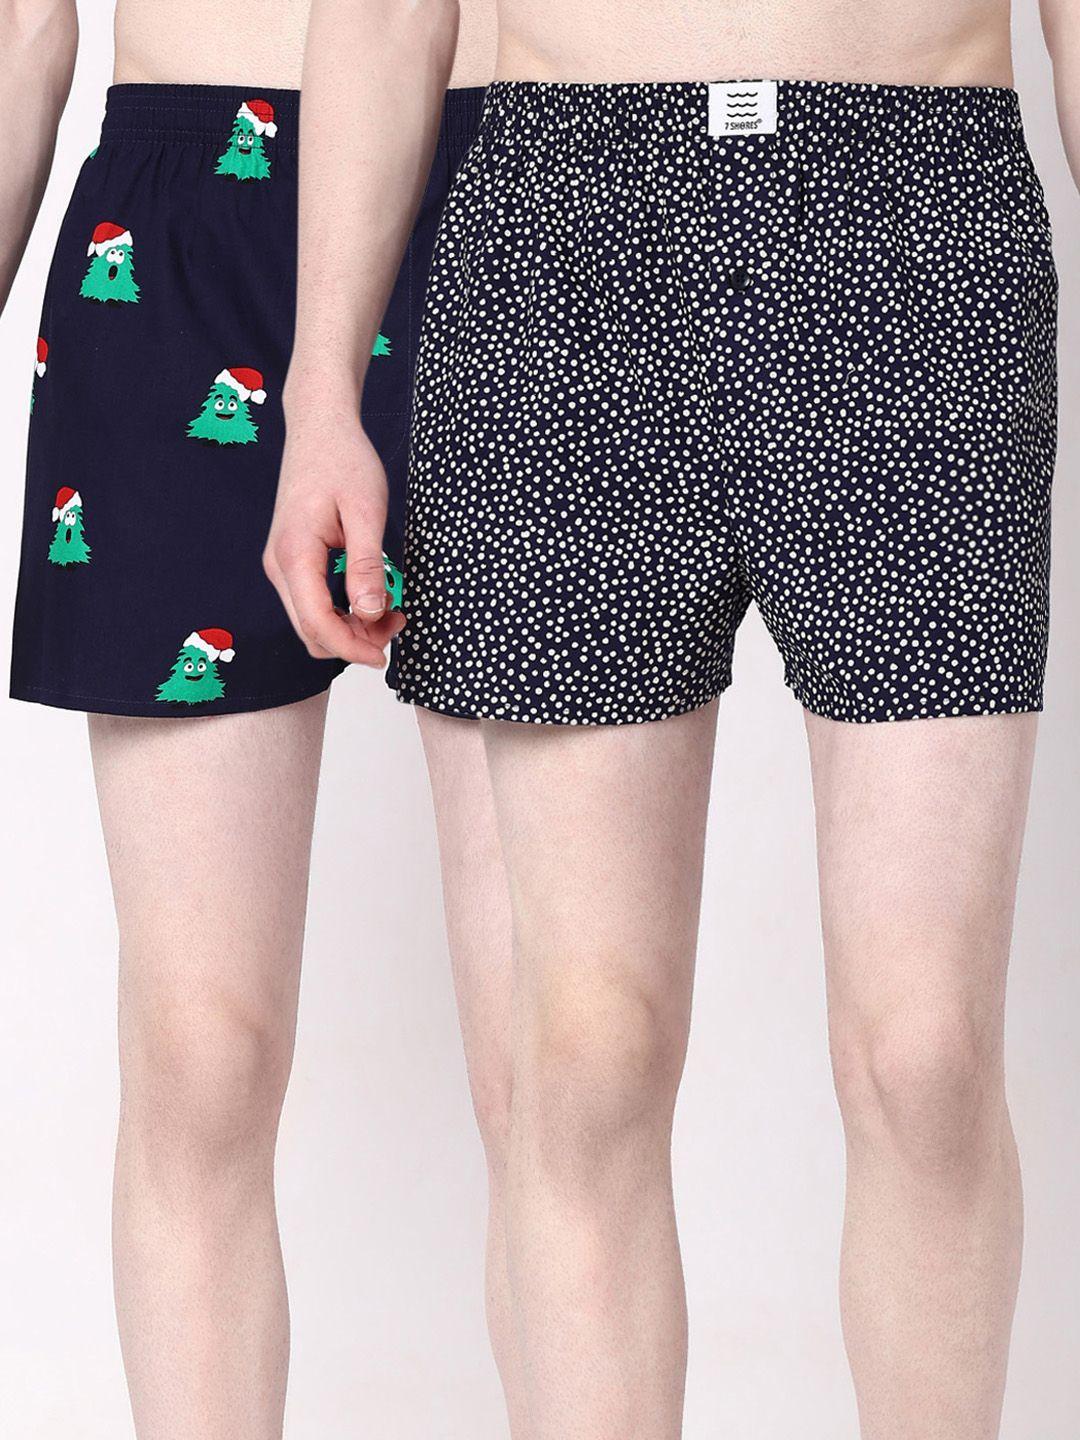 7shores-pack-of-2-printed-cotton-boxers-bst-007